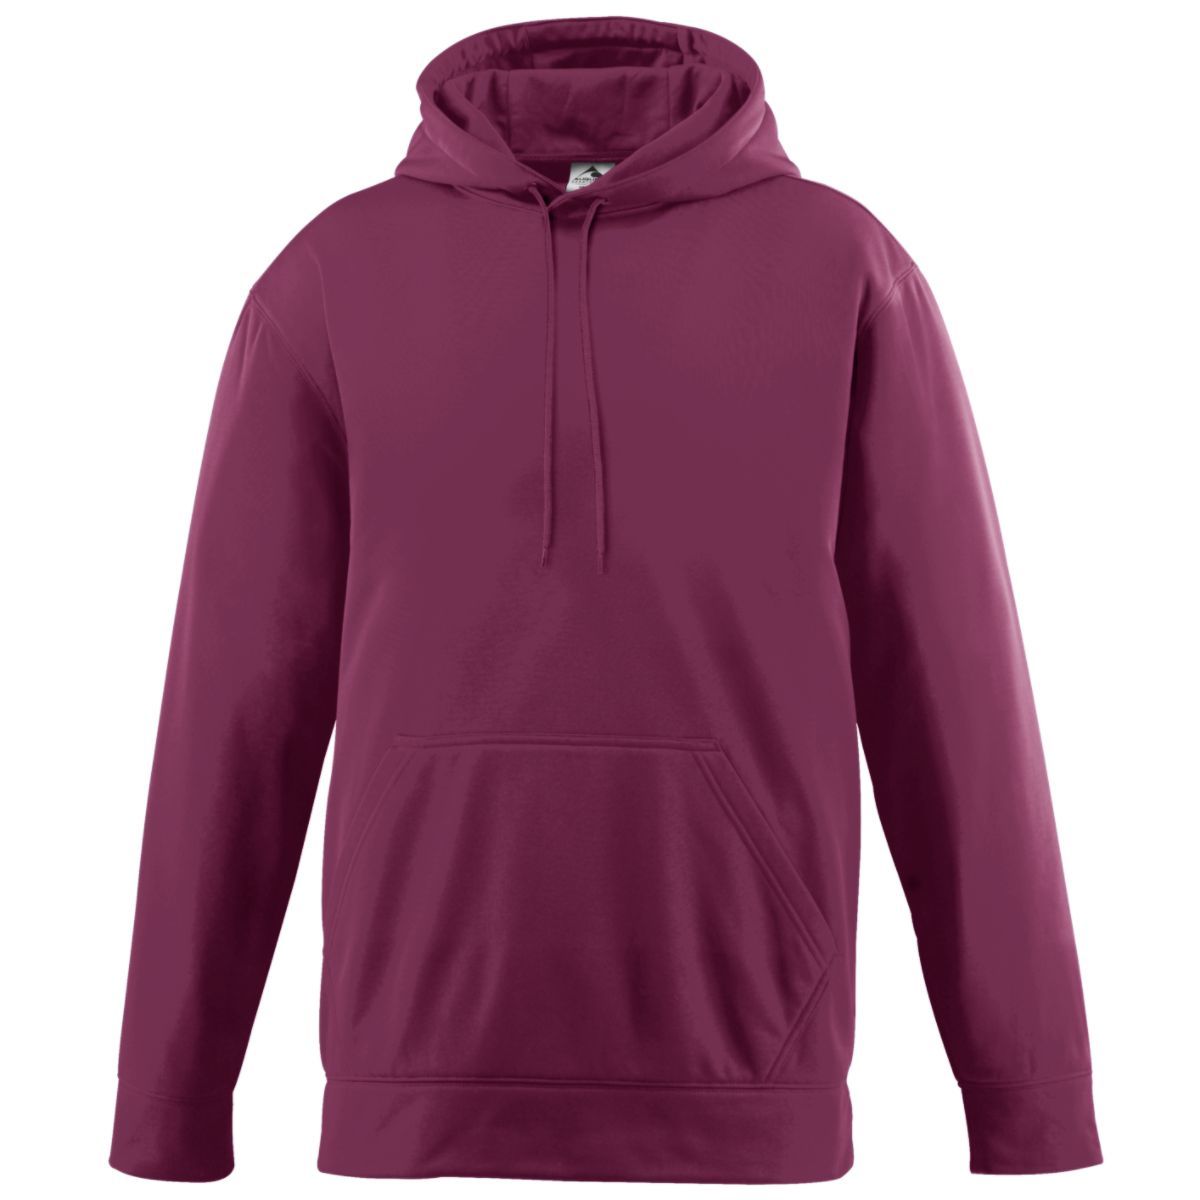 Augusta Sportswear Youth Wicking  Fleece Hoodie in Maroon  -Part of the Youth, Youth-Sweatshirt, Augusta-Products, Outerwear product lines at KanaleyCreations.com